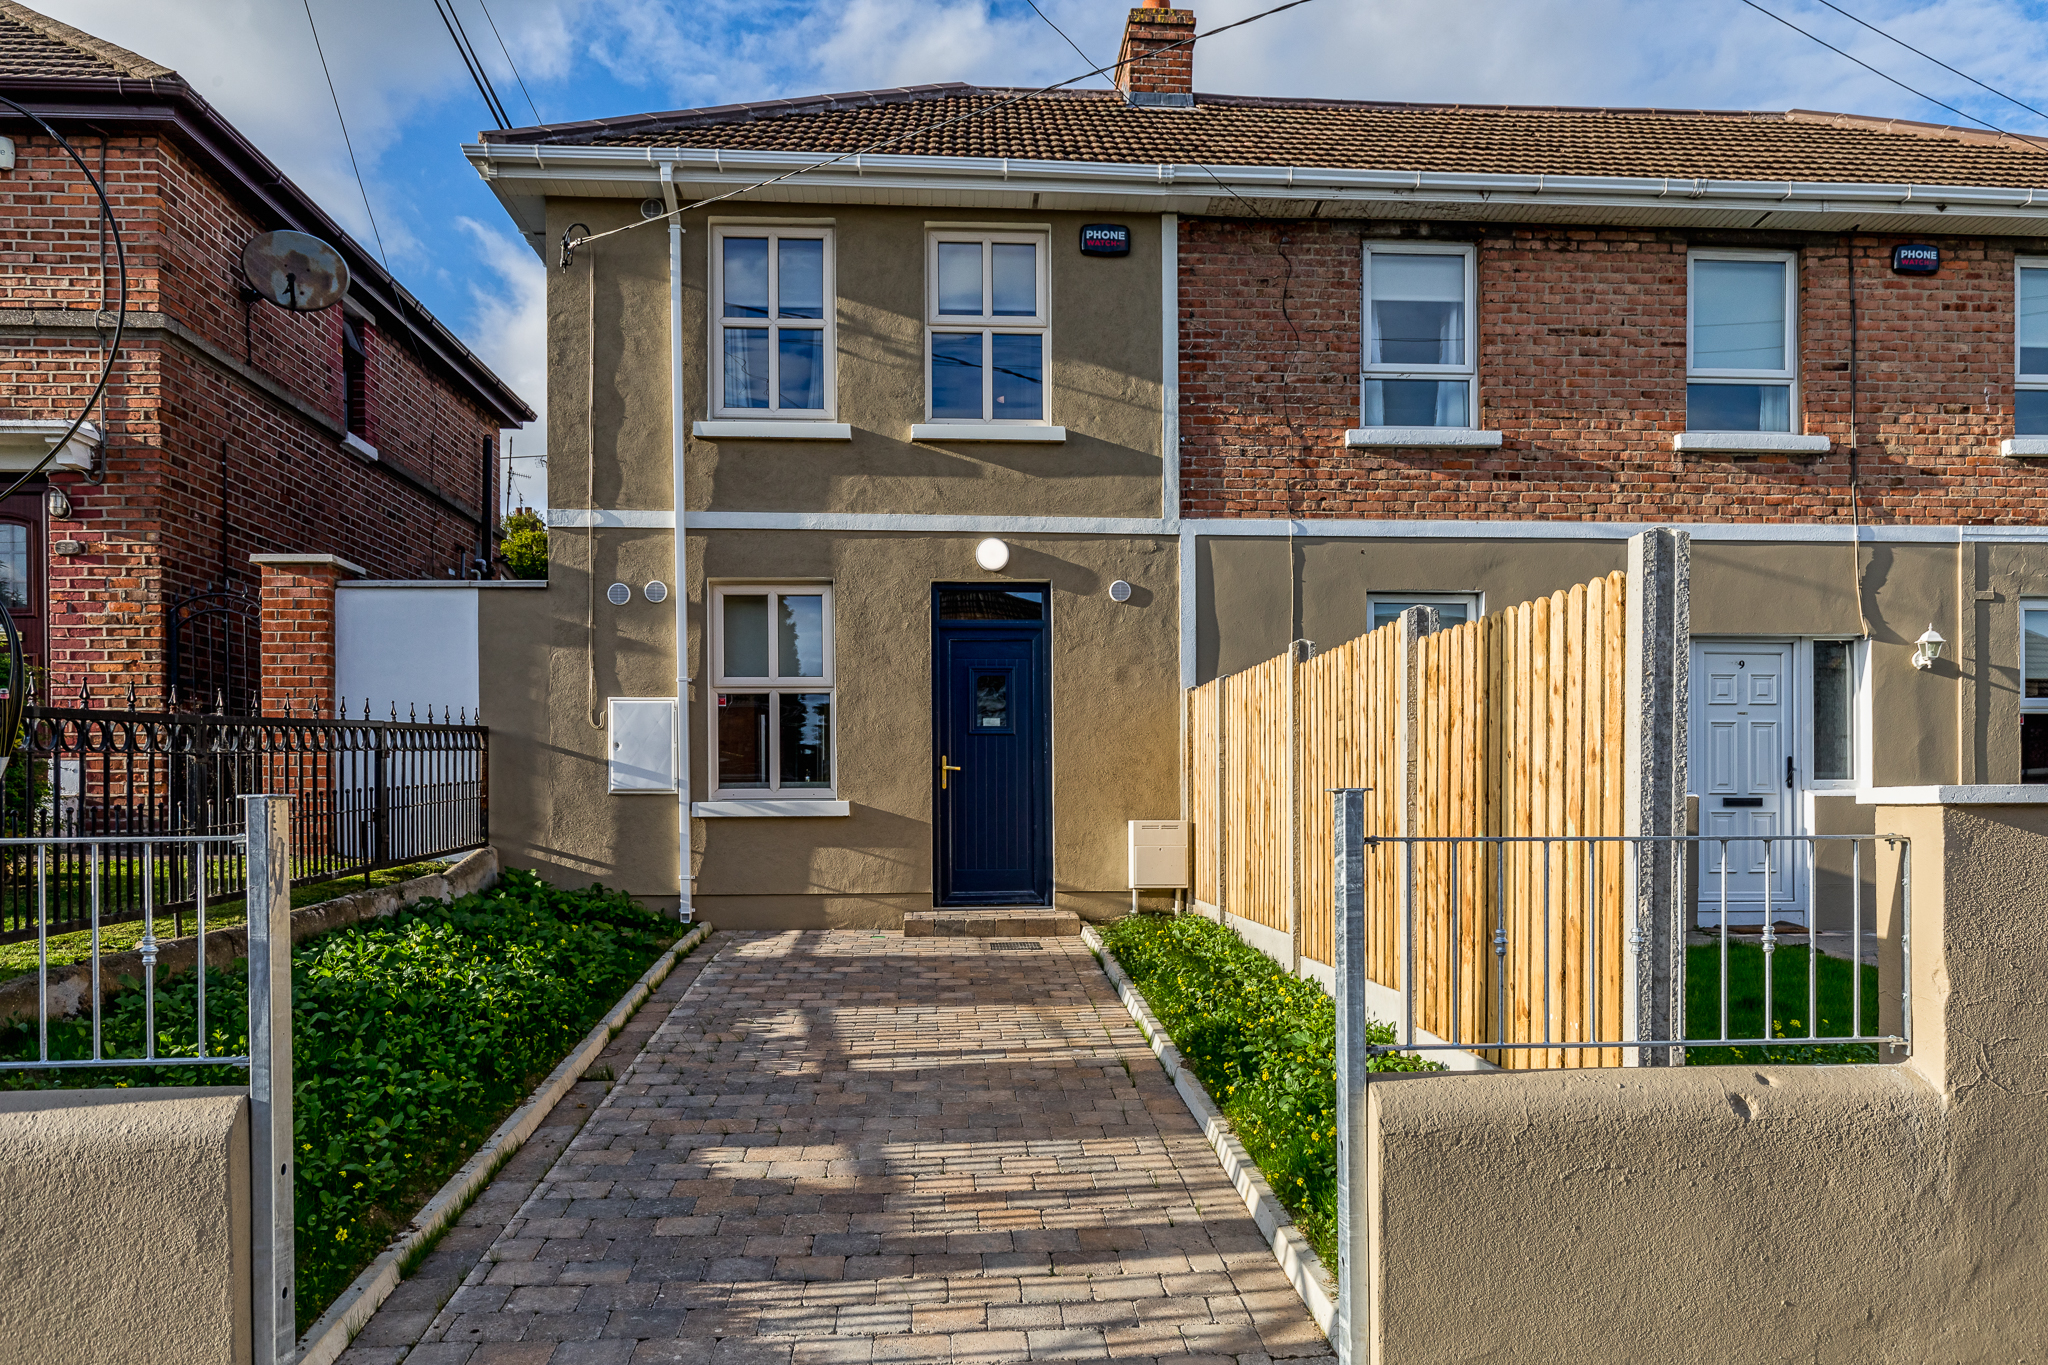 59A Pearse Park Drogheda Co Louth